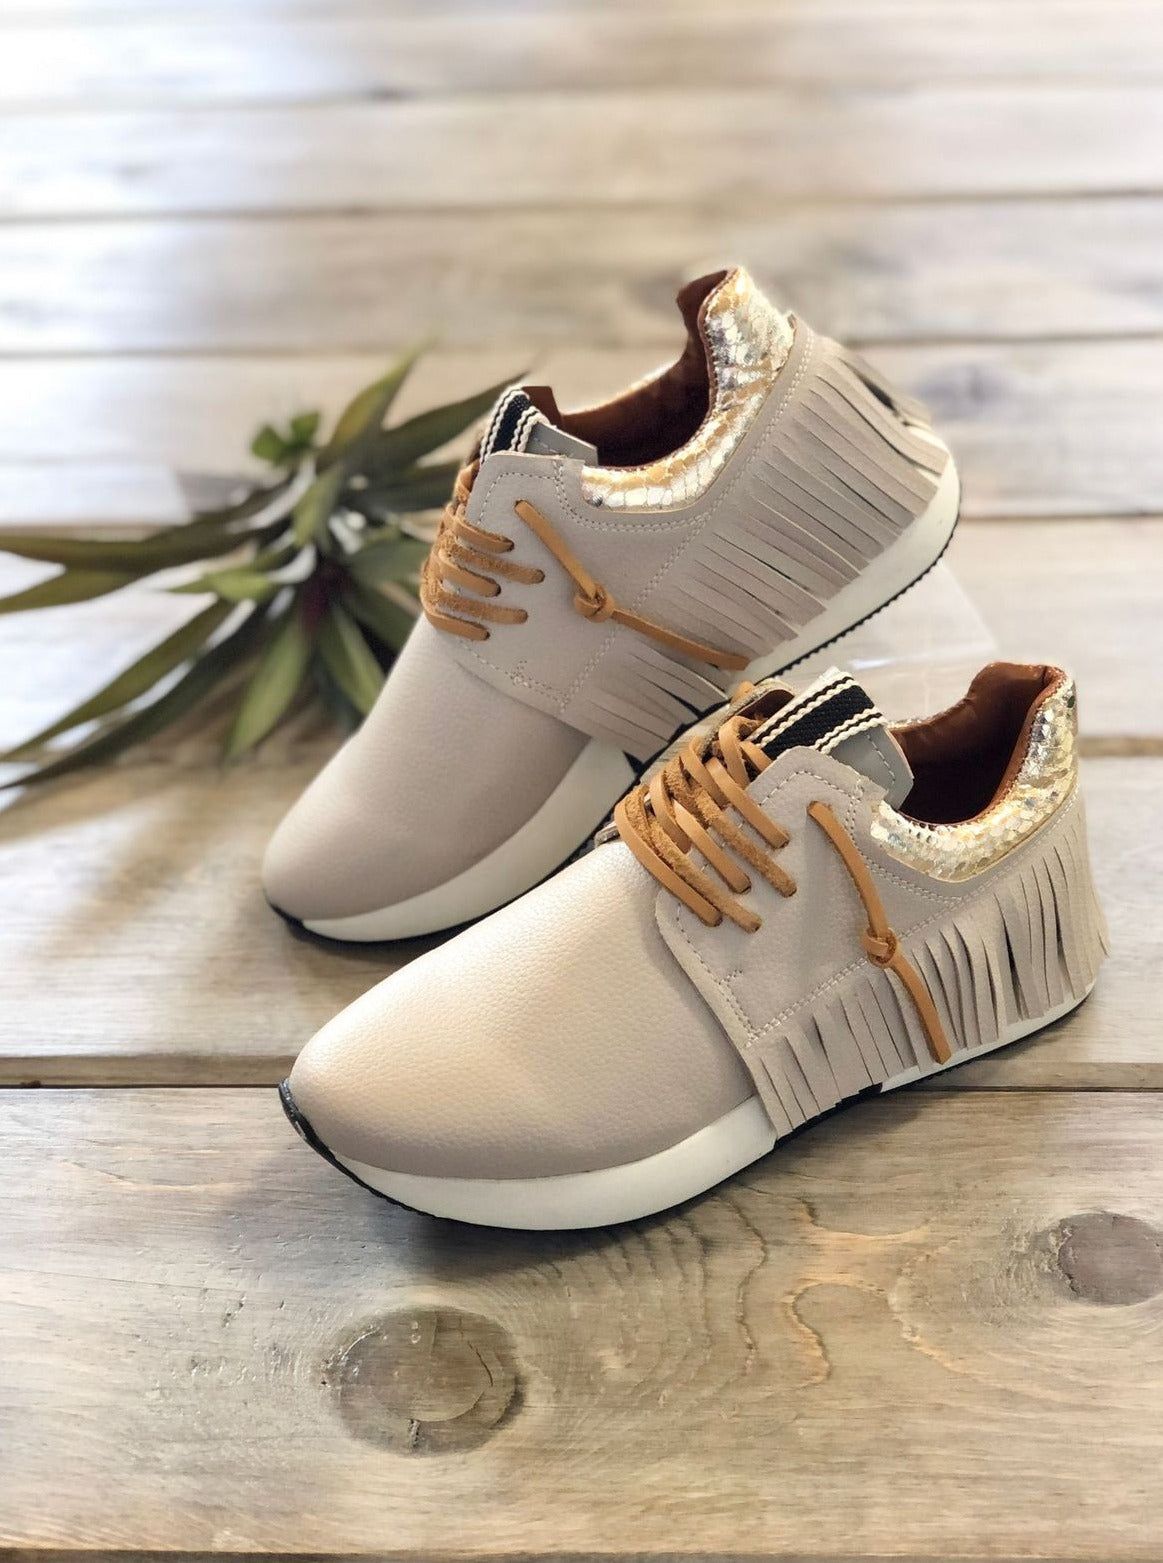 Stylish Fringed Sneakers to Elevate Your Shoe Game